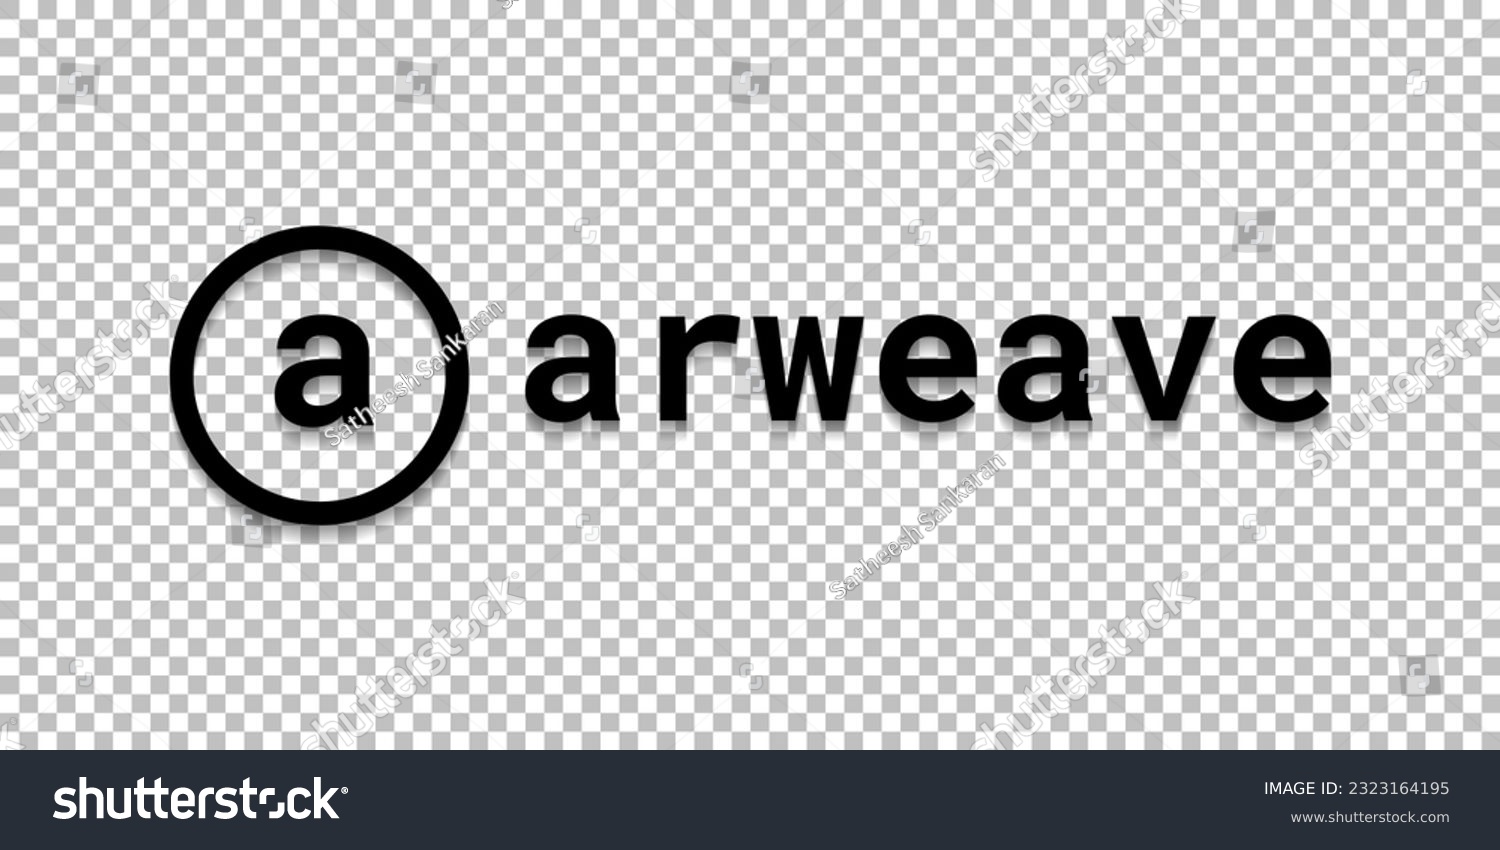 SVG of Arweave (AR) cryptocurrency logo worldmark isolated on transparent png background vector svg